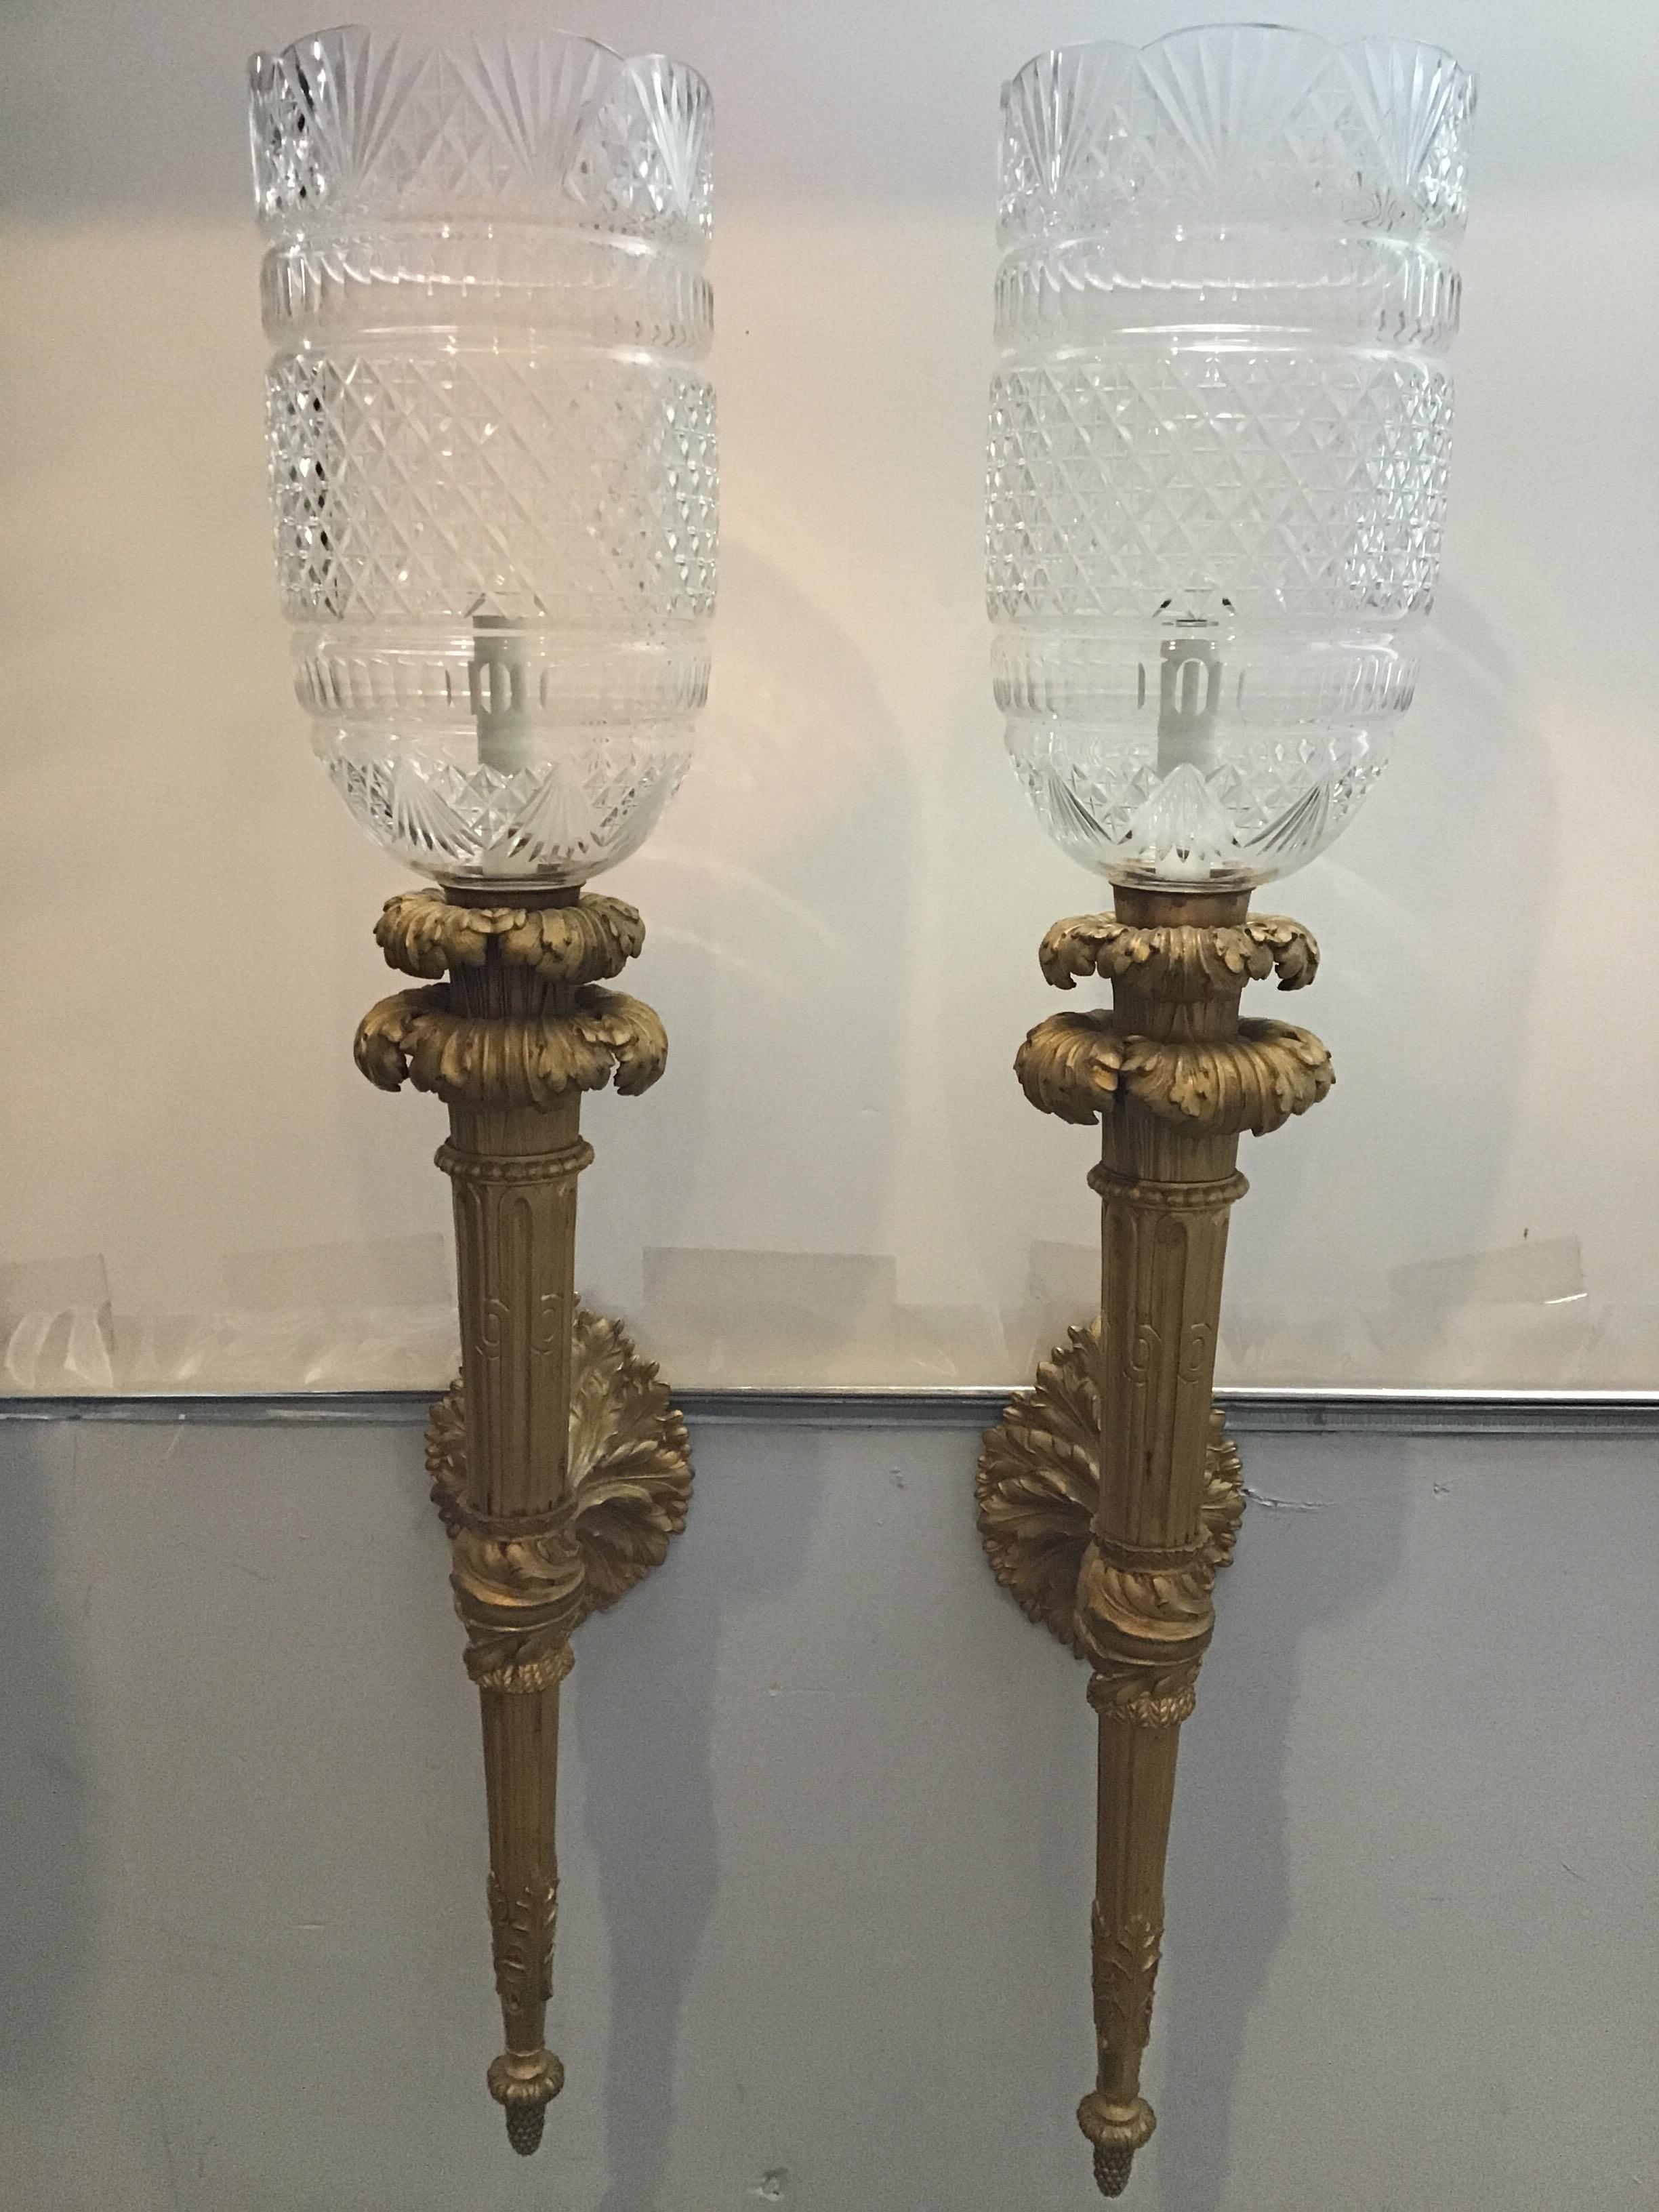 1860s Large French Gilt Bronze Torch Sconces For Sale 1